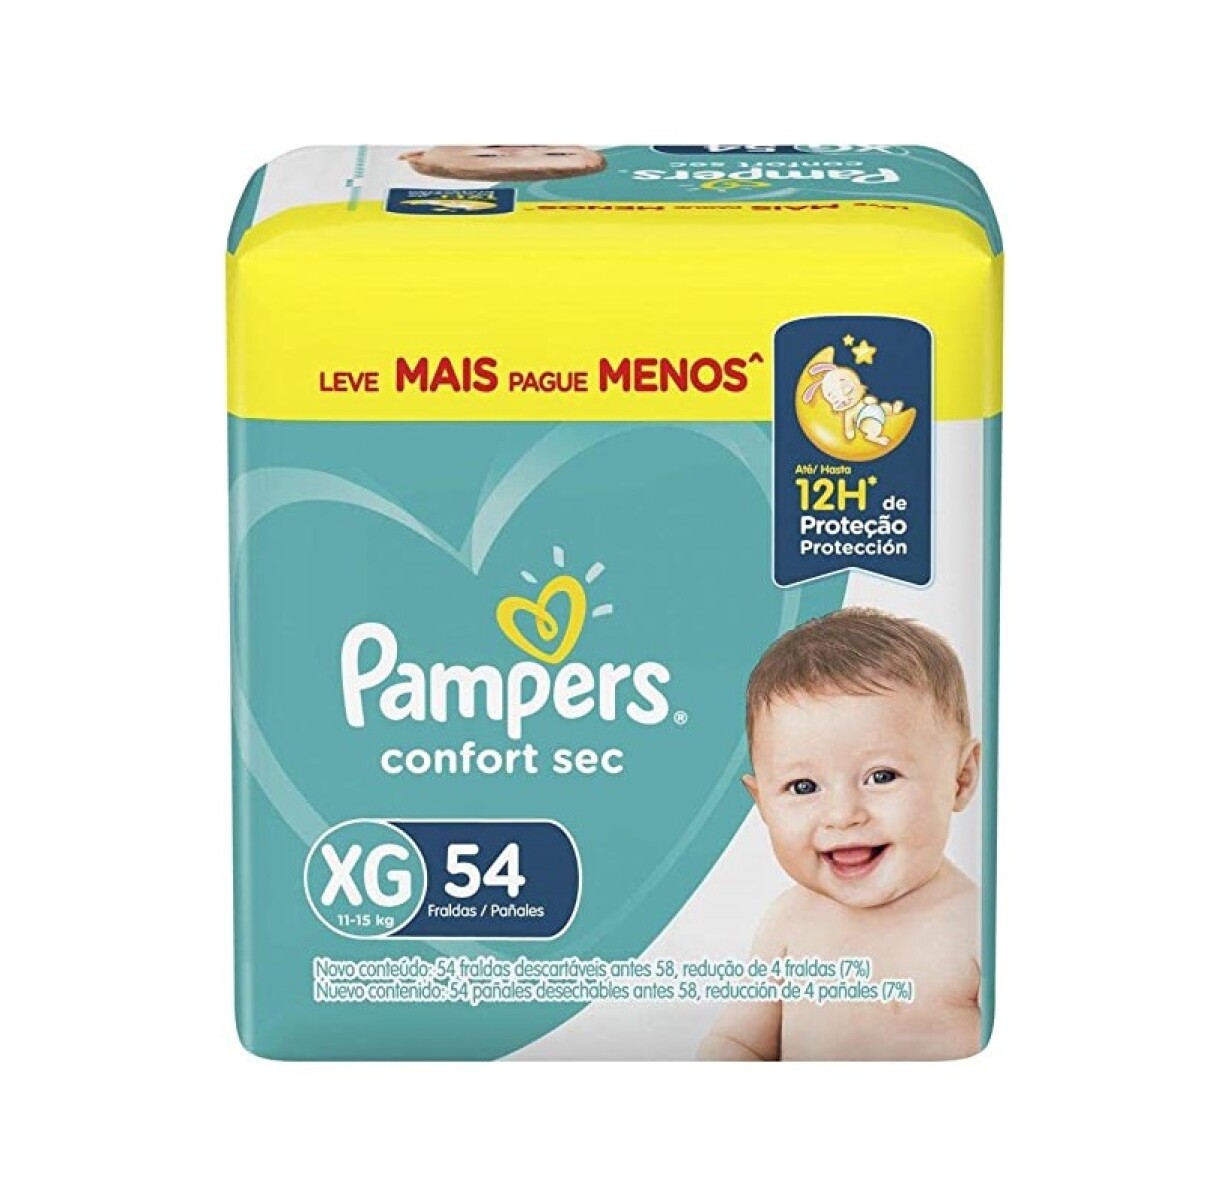 Pañales Pampers Confort Sec Talle Xg 54 Uds. 